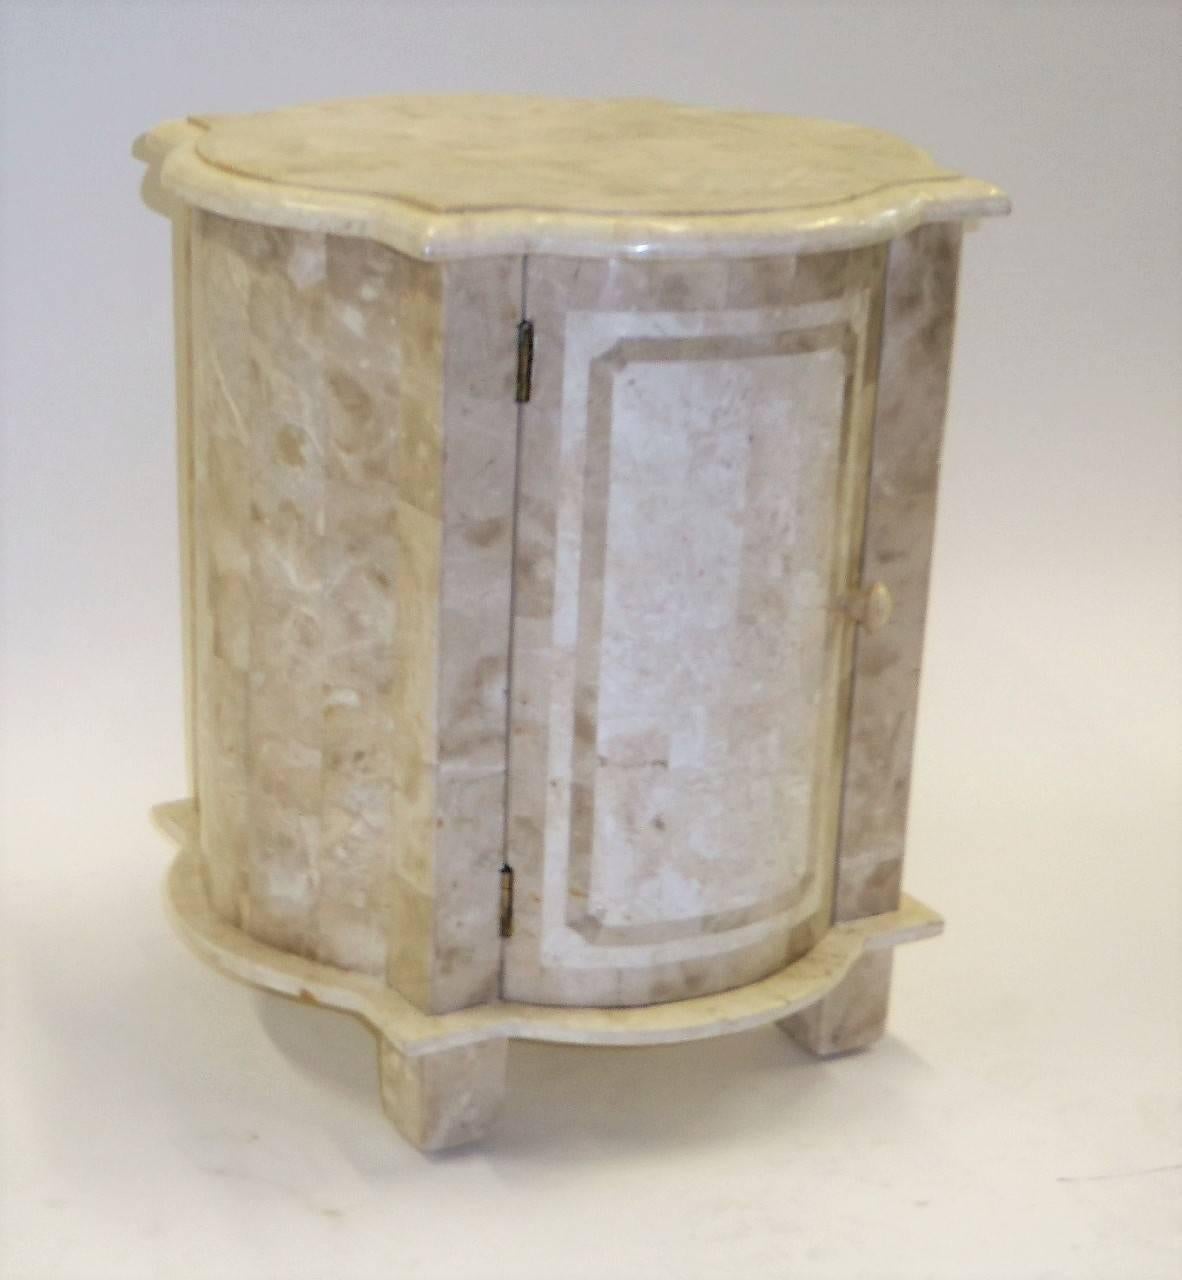 With a Moorish shape from the past, yet quite modern, this exquisite bedside table or side table is composed of tesselated inlaid fossil stone buffed to a elegant shine. With a single door opening to storage. From the Marquis Collection of Beverly